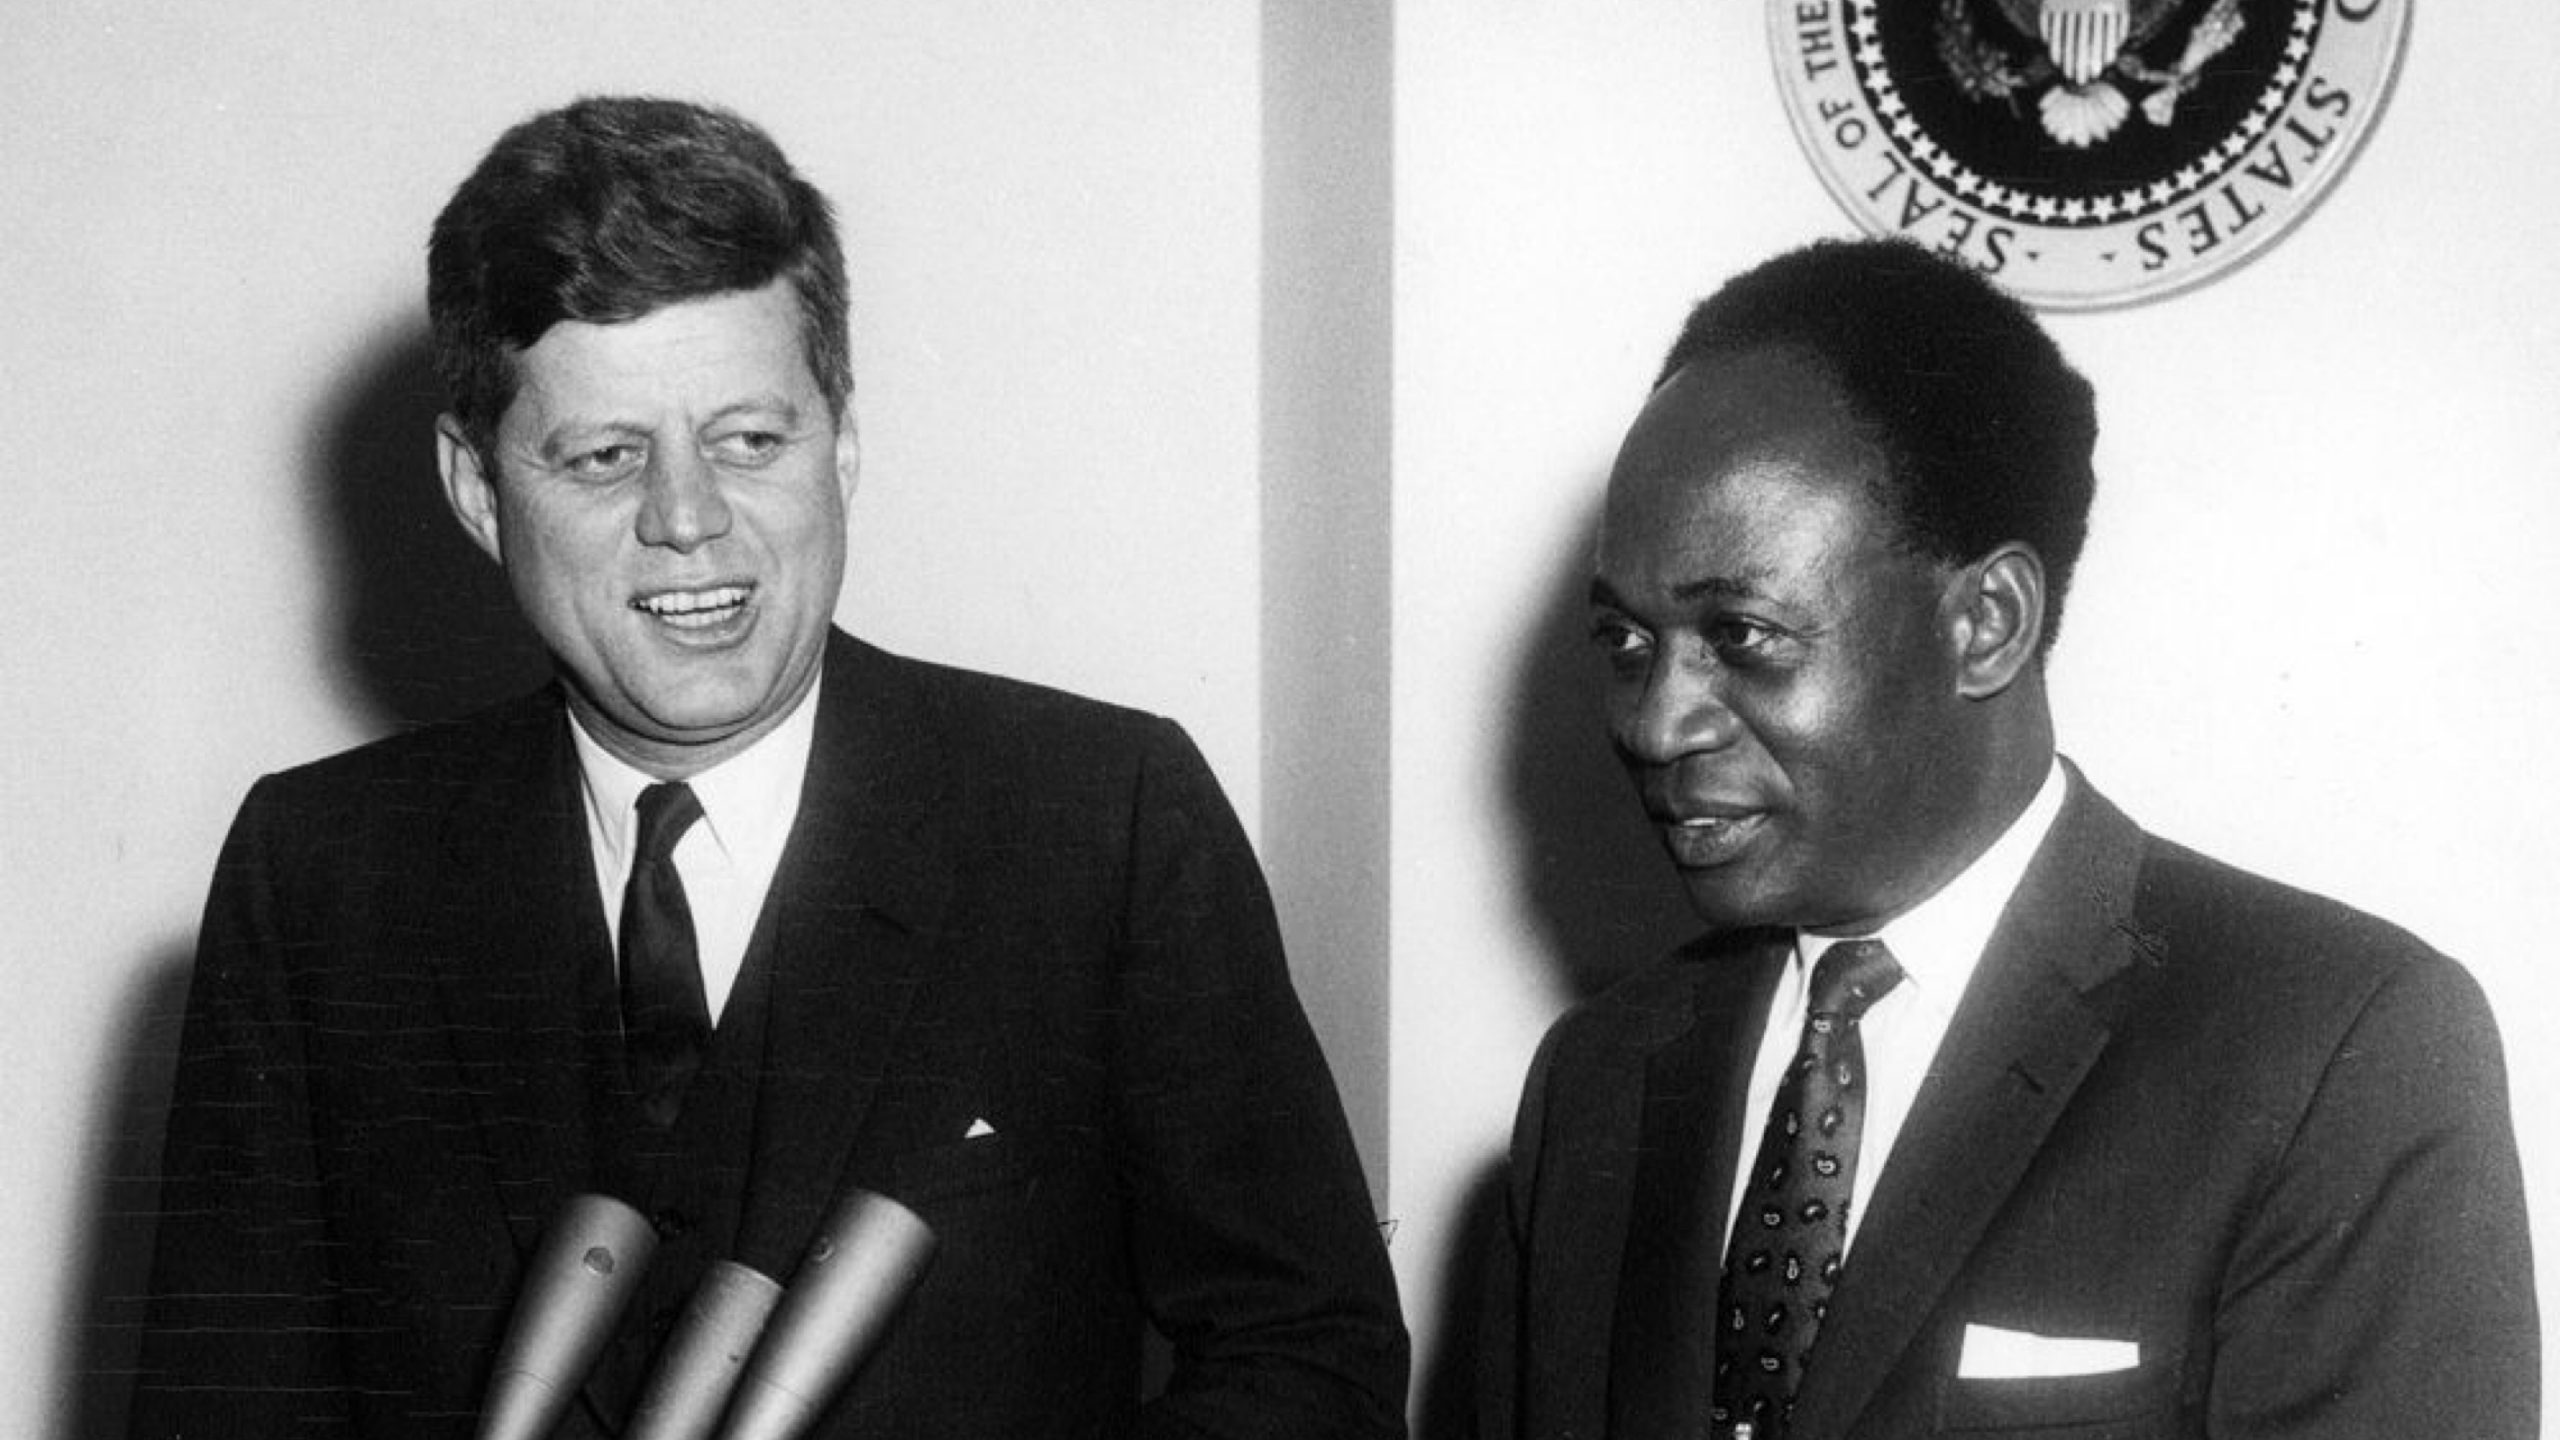 Today In History: Dr Kwame Nkrumah Meets John F. Kennedy In Washington D.C. on 8th March 1961